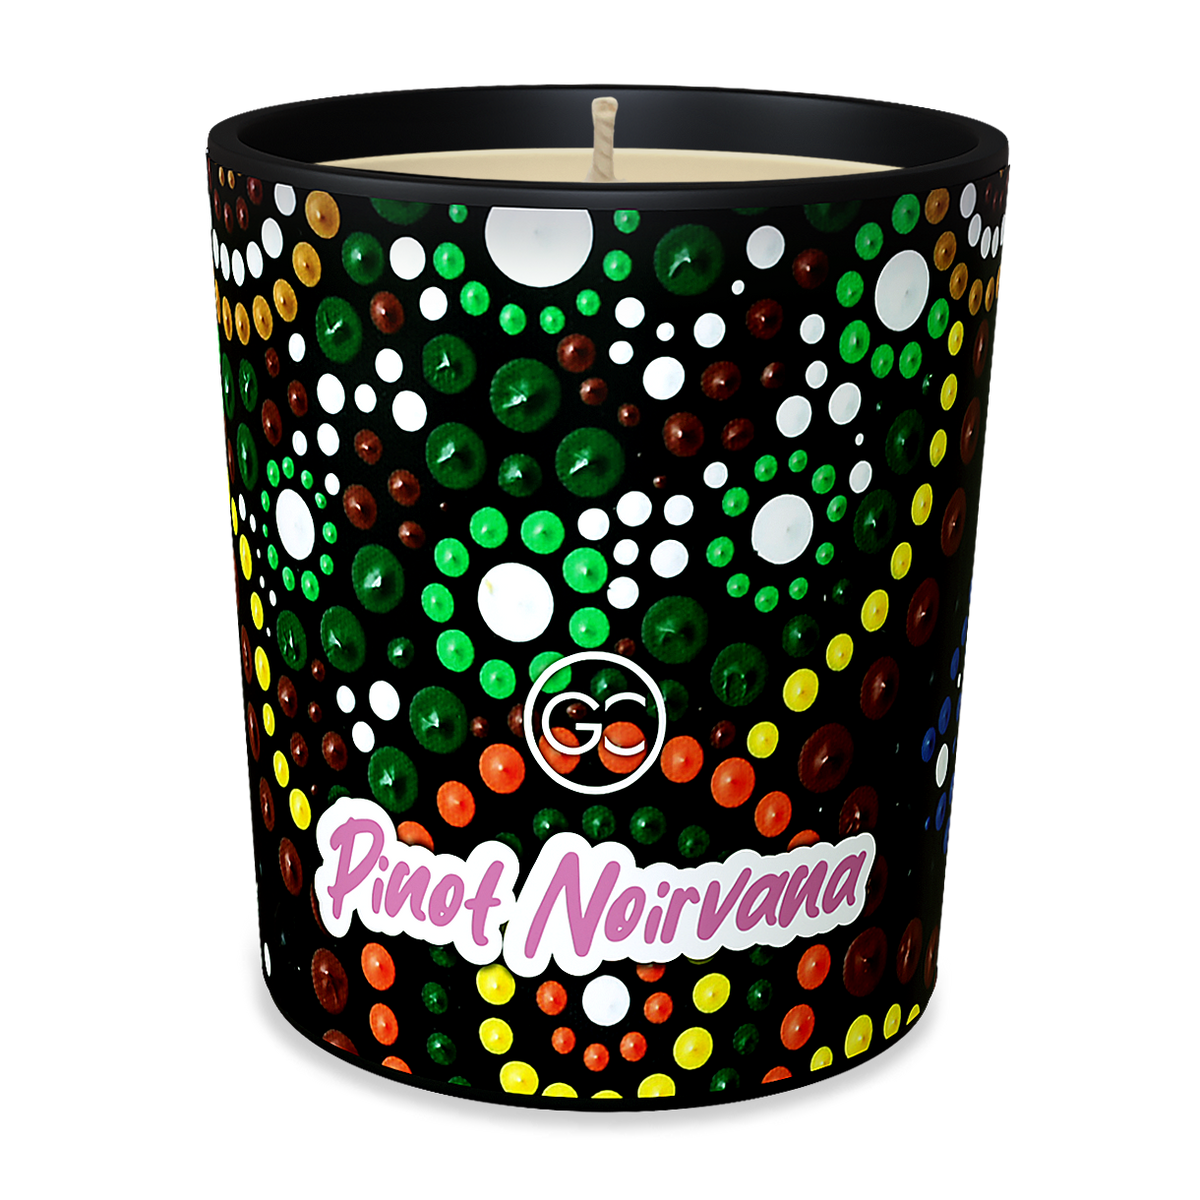 Pinot Noirvana - Lemon and Black Pepper Scented Soy Paraffin Candle 40hr Burn